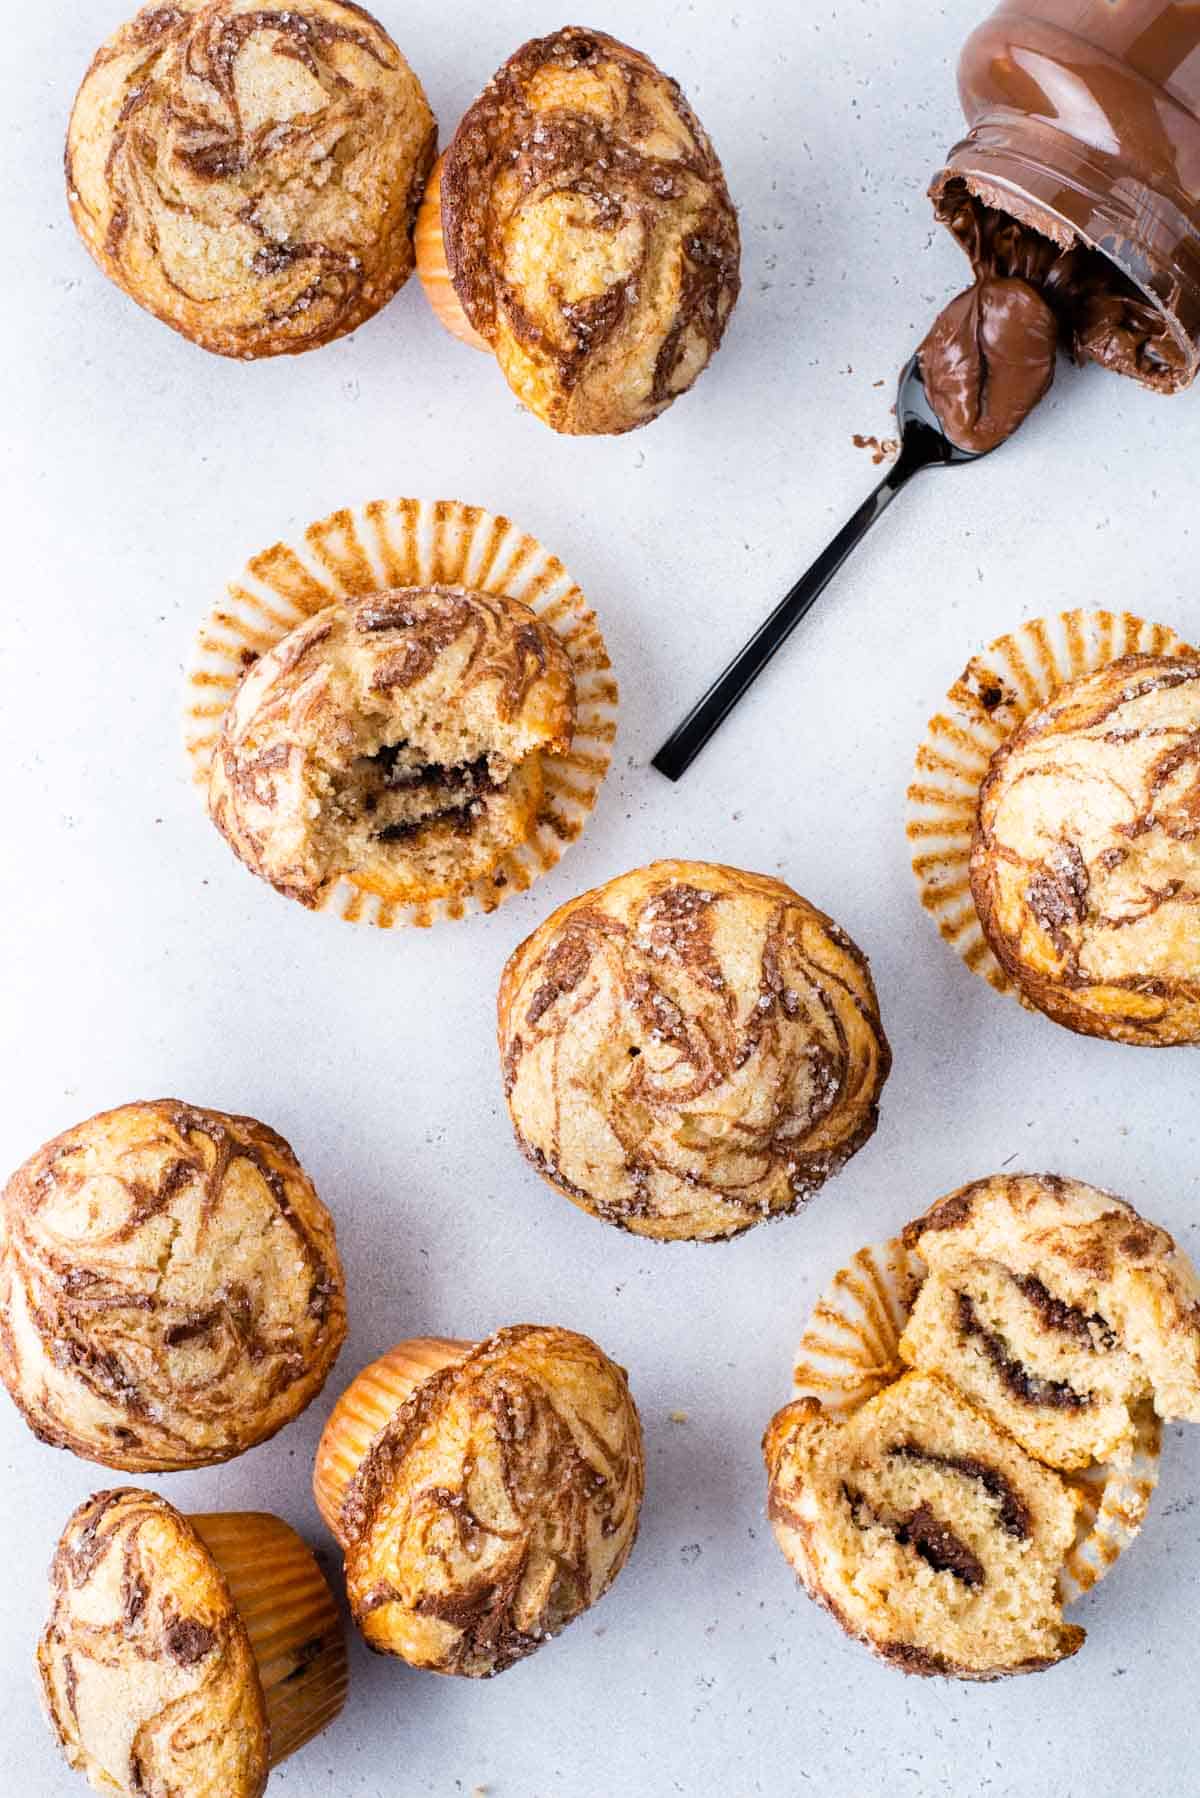 several nutella swirl muffins arranged on a white surface, with some muffins sitting upright, some on their sides, one cut in half exposing the center, and one with a bite out of it, with a nutella jar laying on its side and a spoon of nutella laying beside its opening